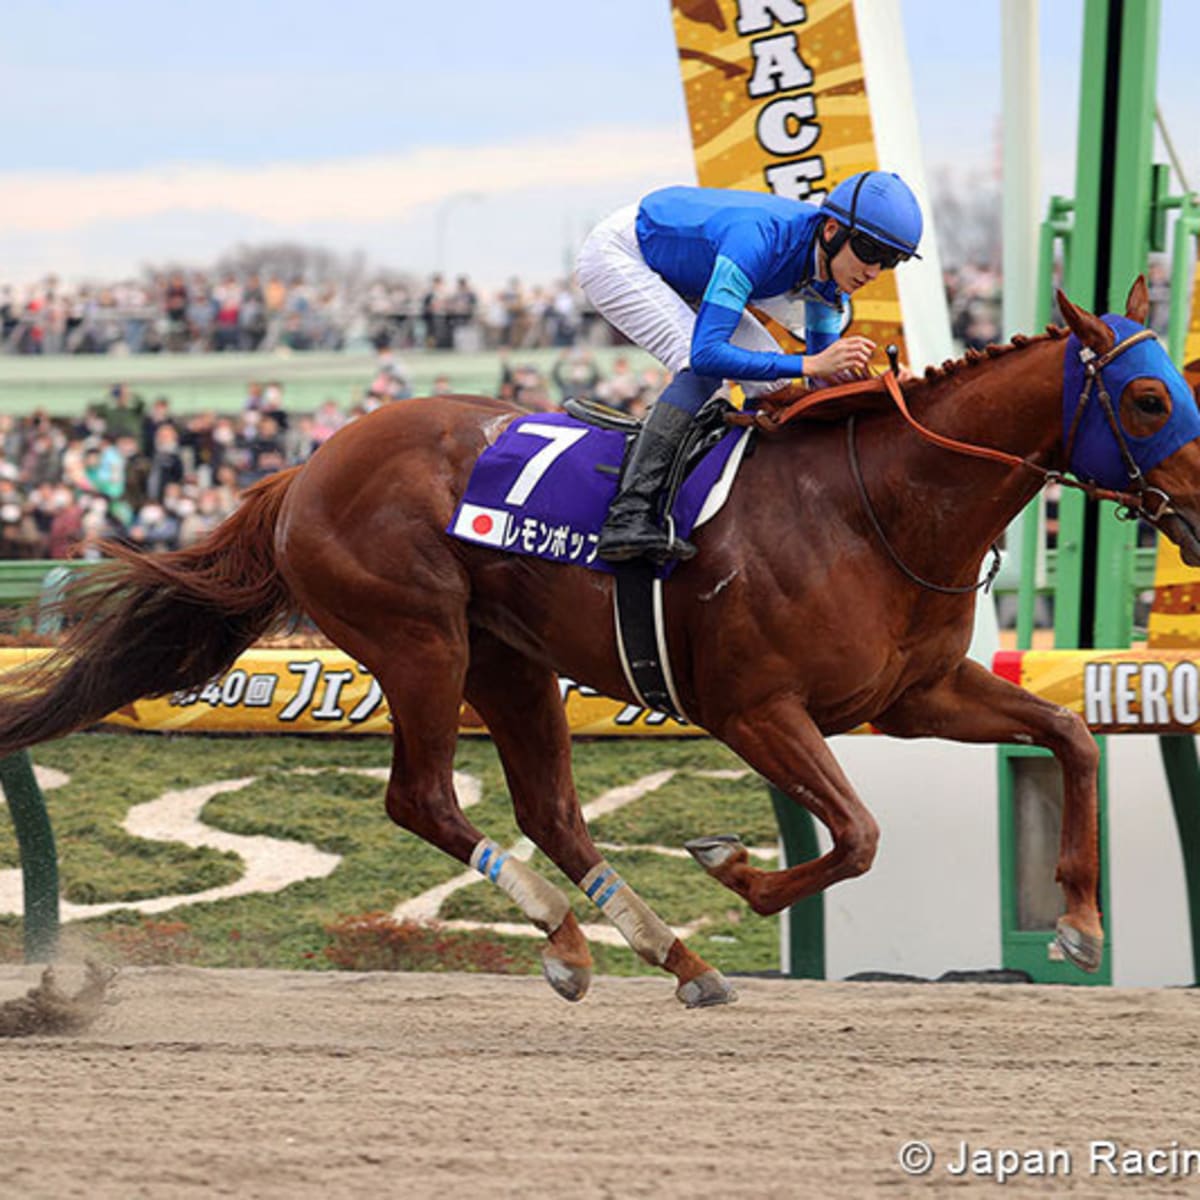 Godolphin's Lemon Pop Secures Breeders' Cup Classic Berth With 